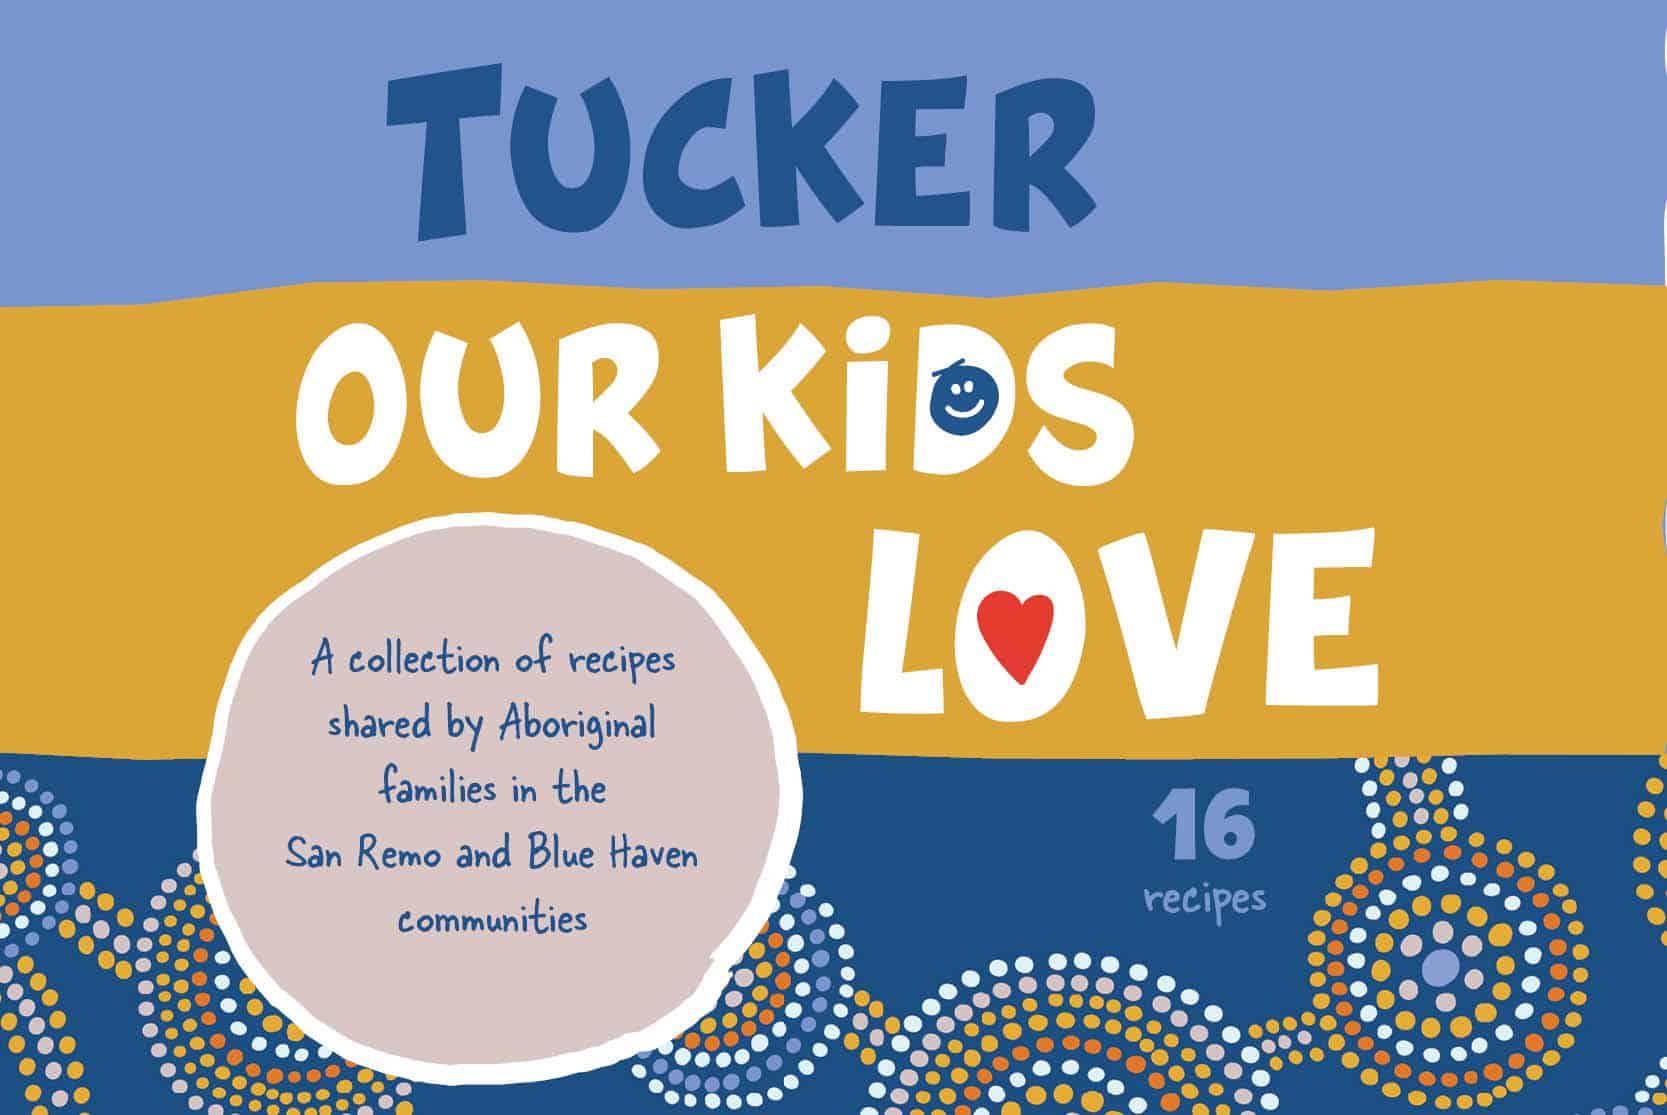 Tucker our kids love cookbook front cover.